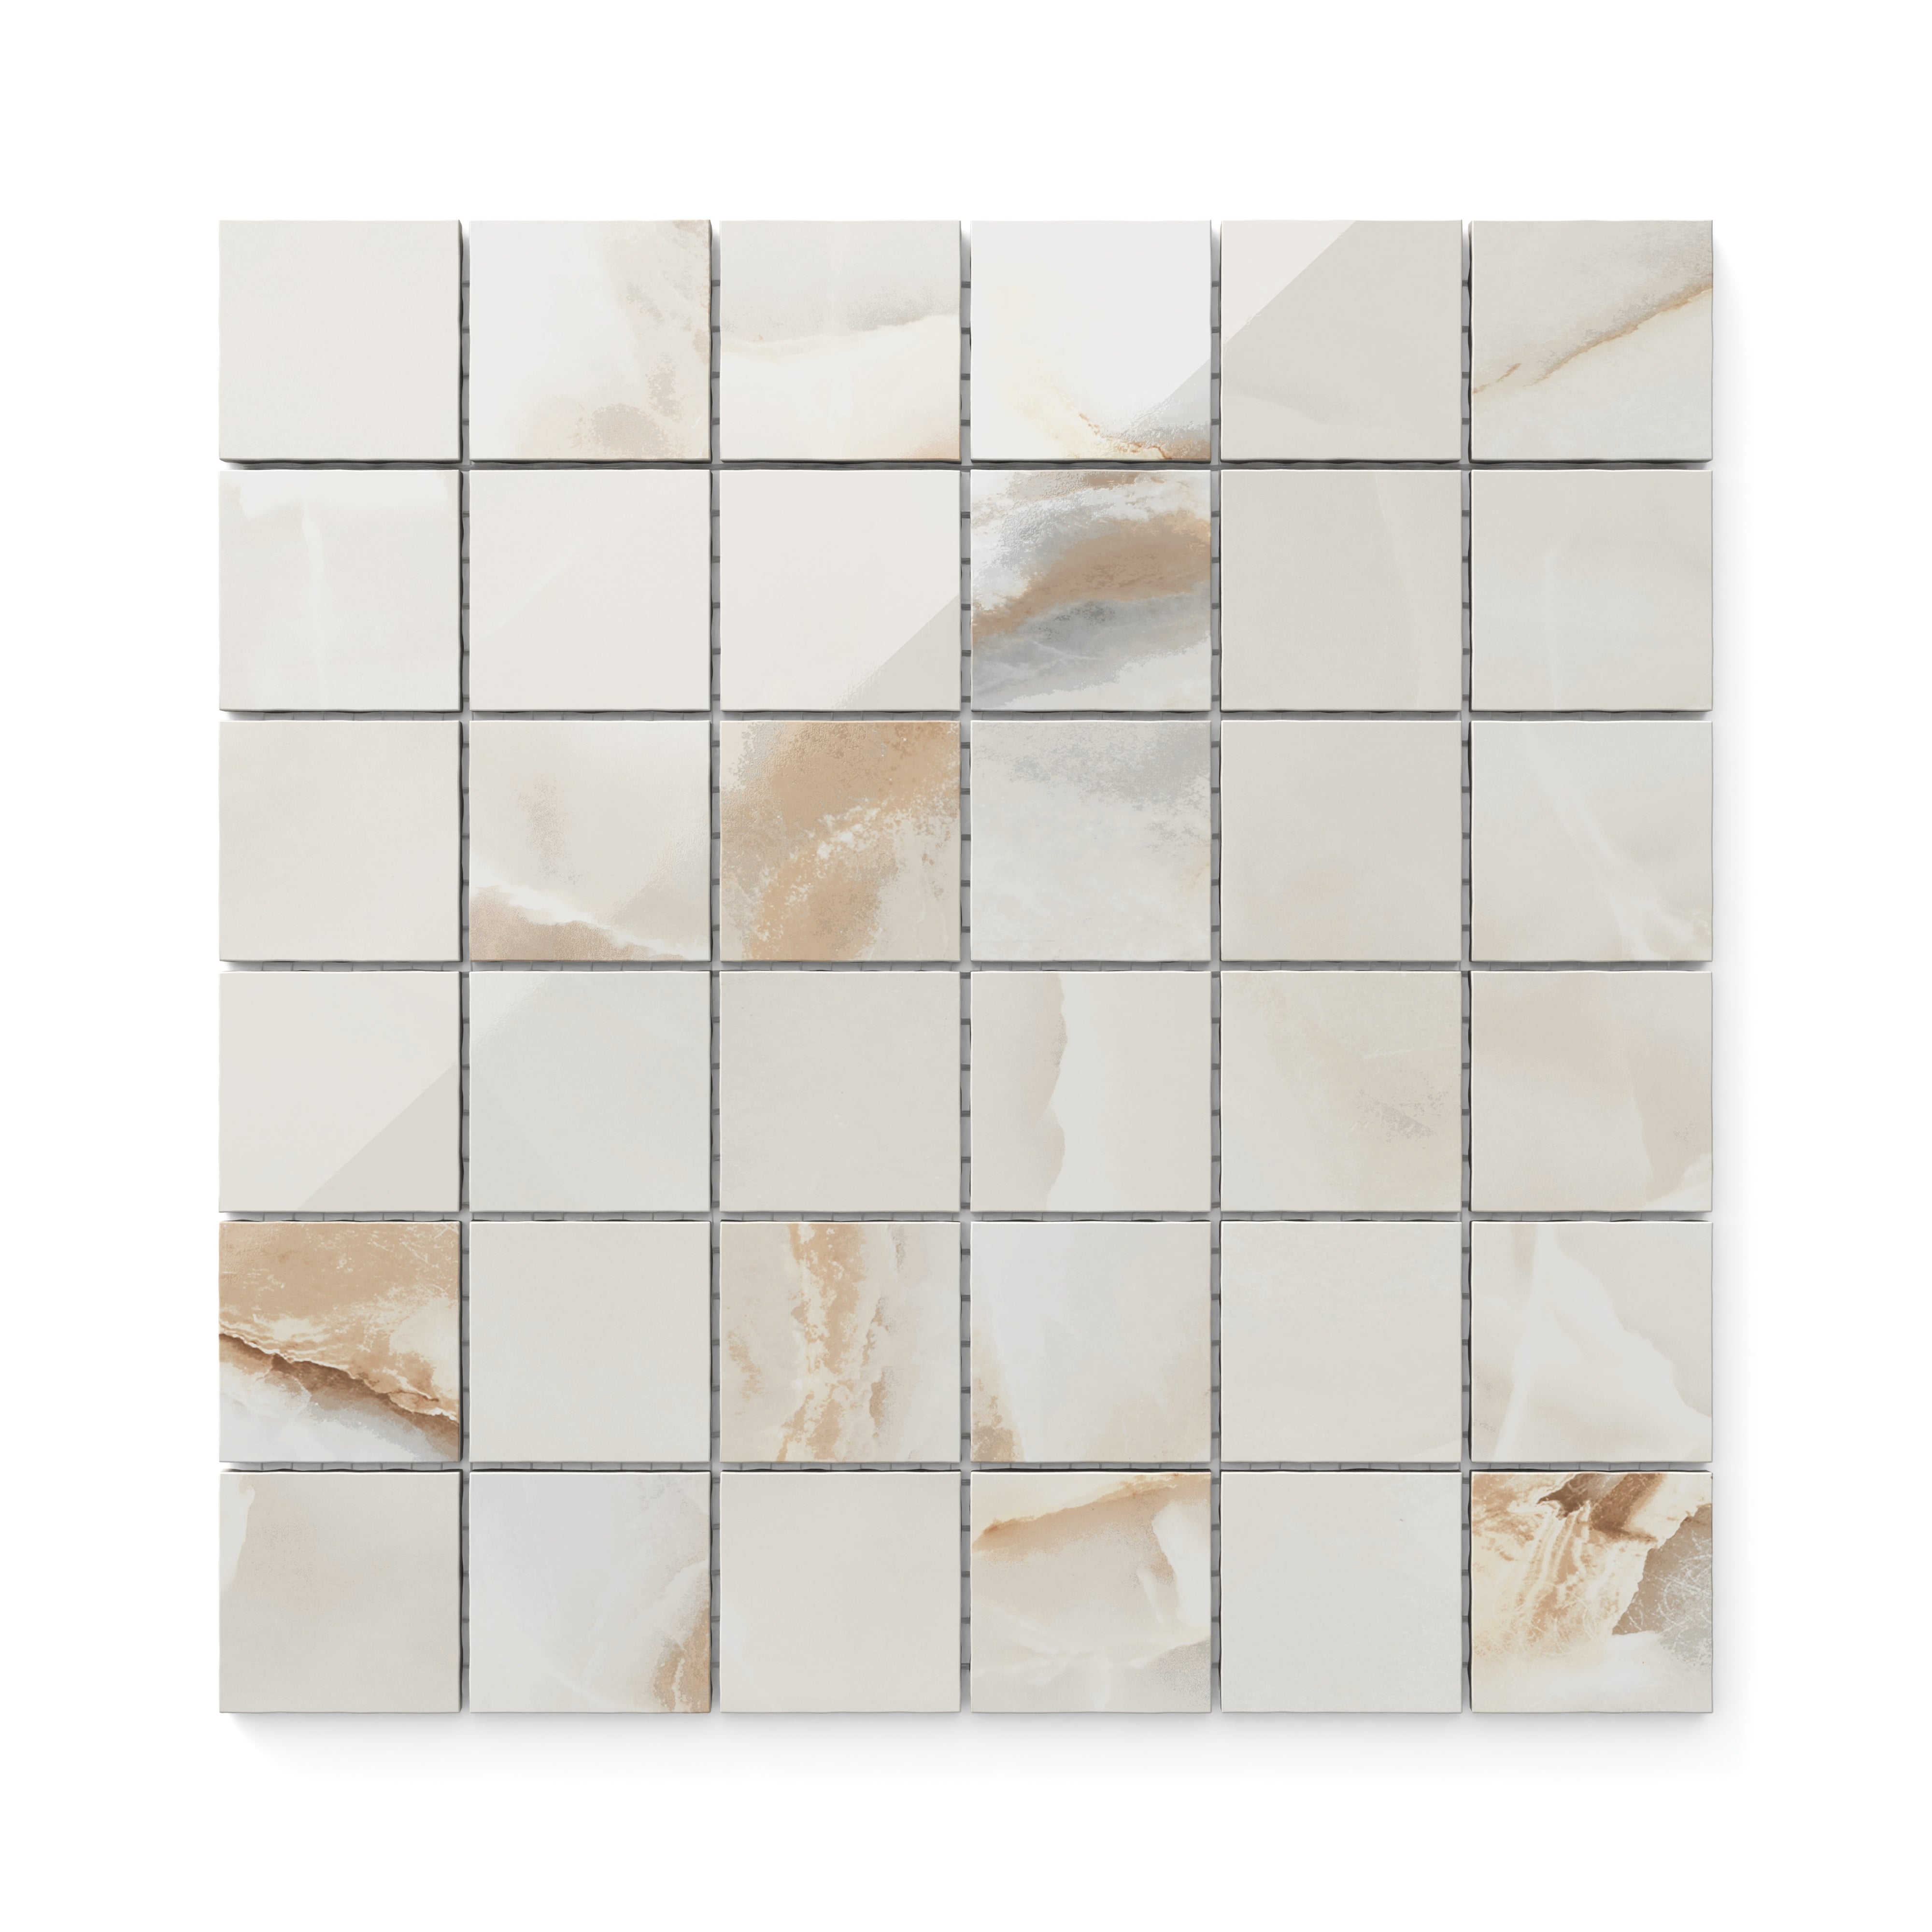 Astrid Alabaster 2x2 mosaic porcelain tile showcases unparalleled onyx realism, perfect for intricate detailing.